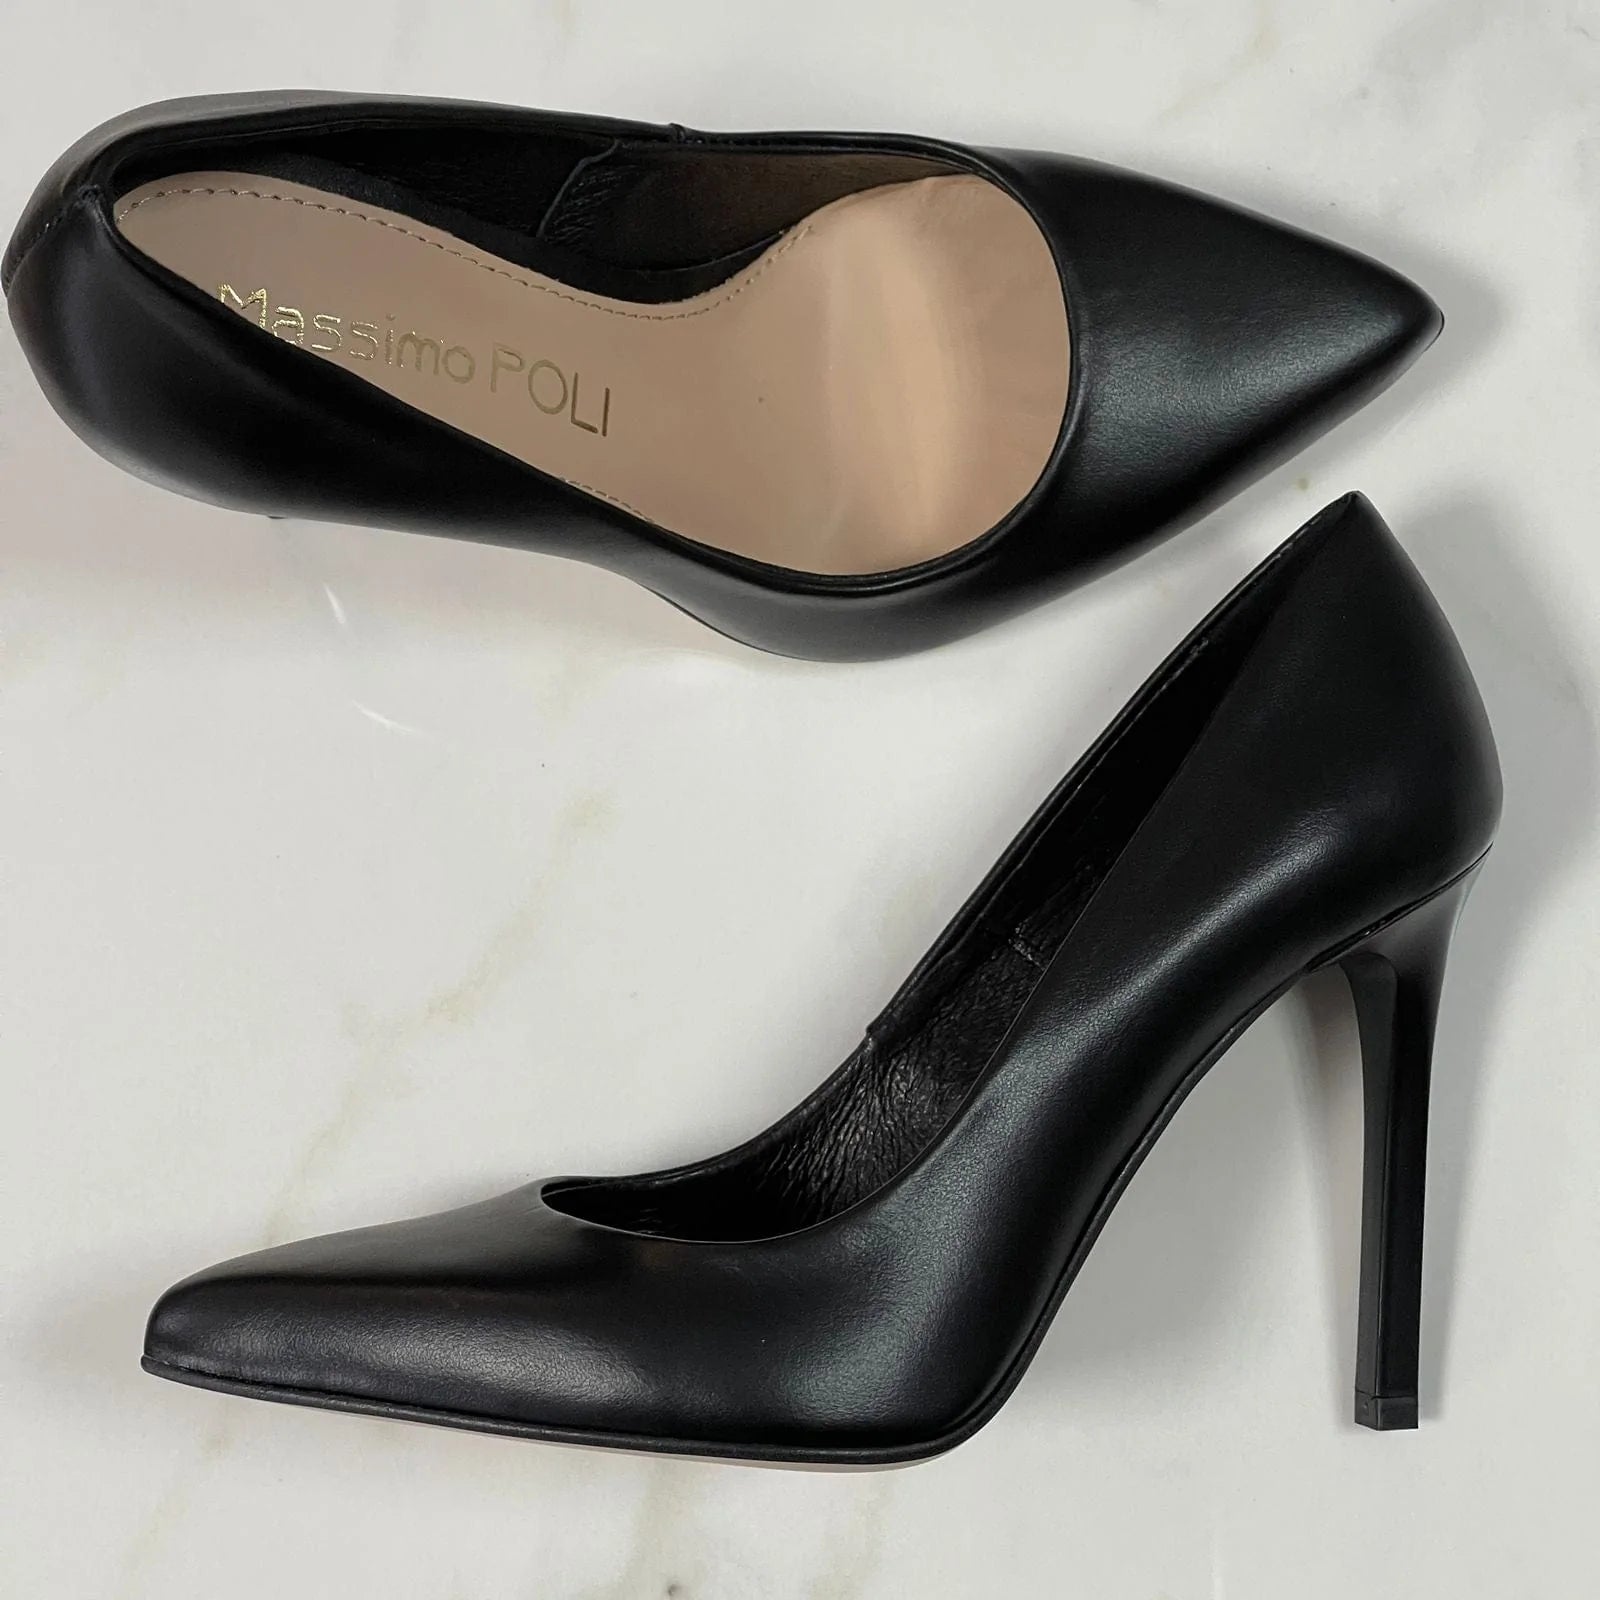 Pointed toe balck leather petite court shoes